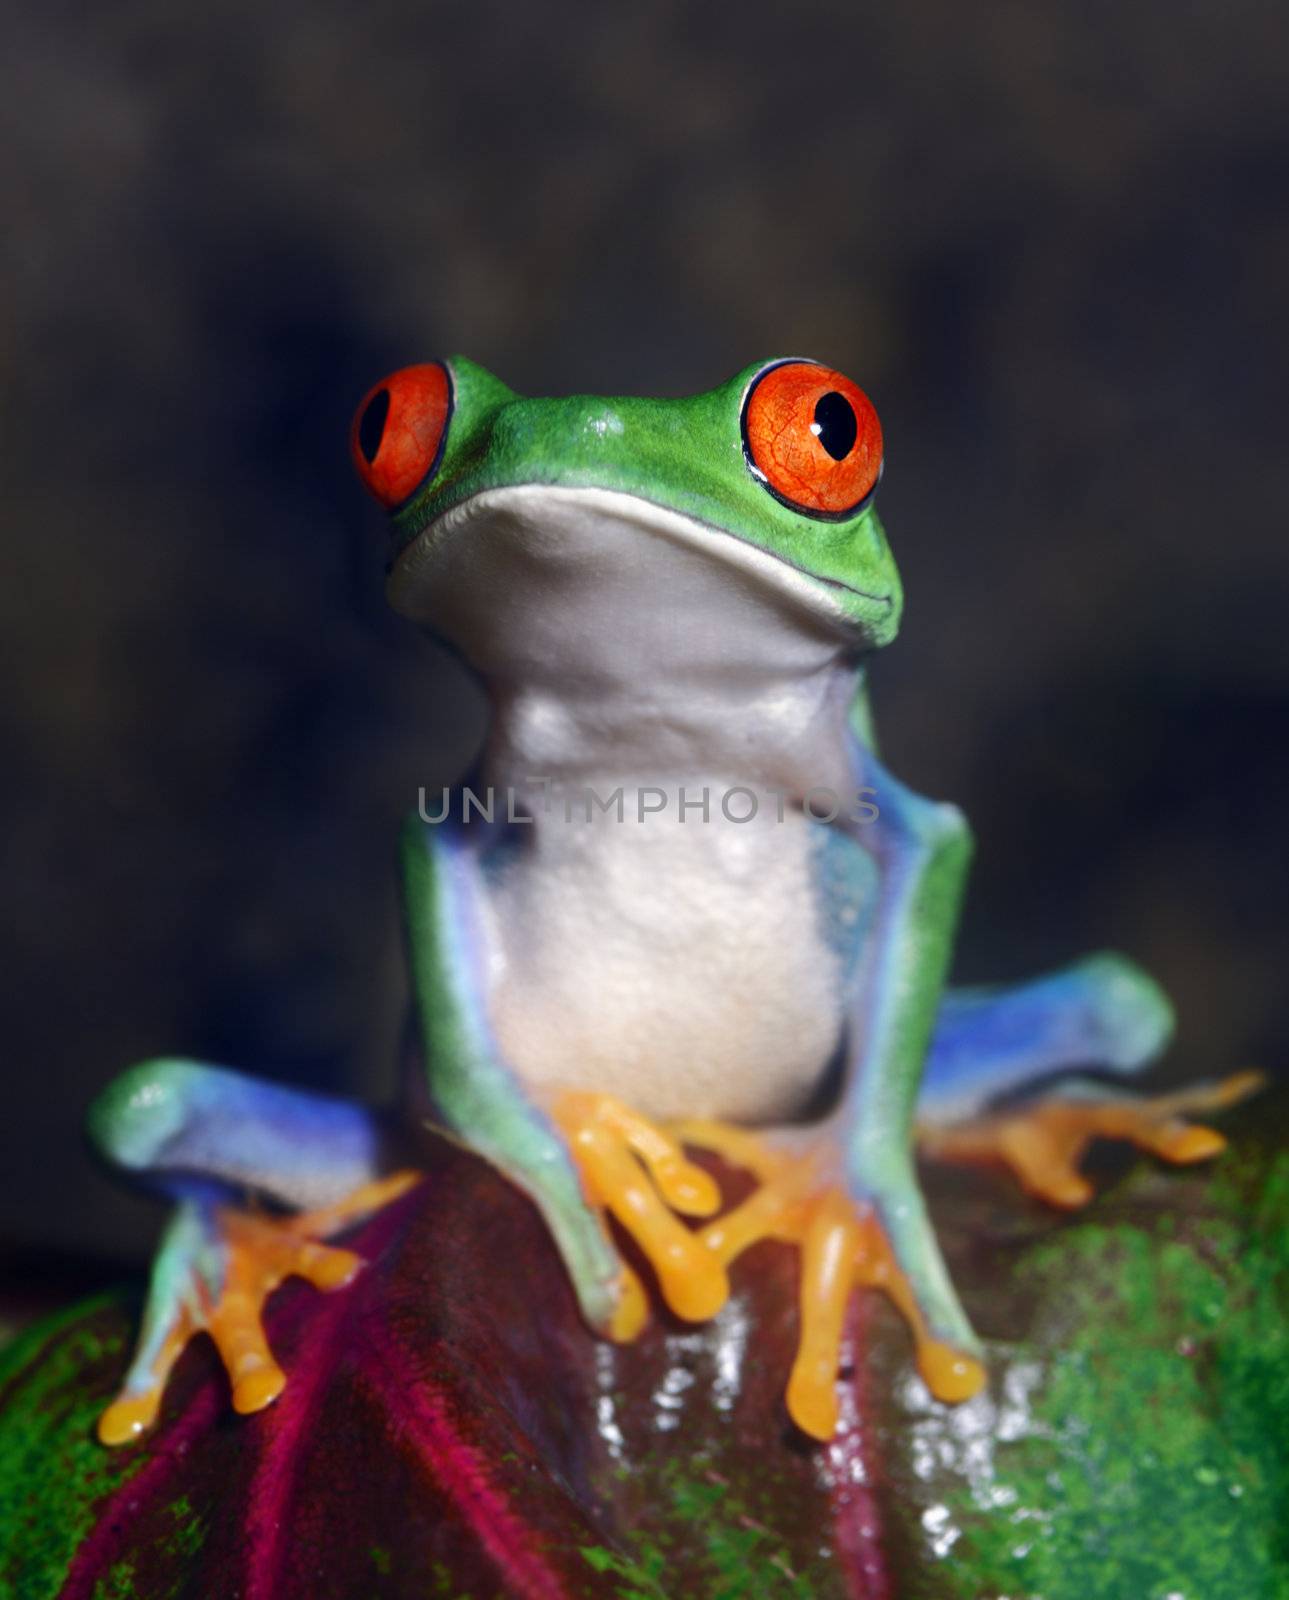 An macro shot of a Red-Eyed Tree Frog (Agalychnis callidryas) in its tropical environment.